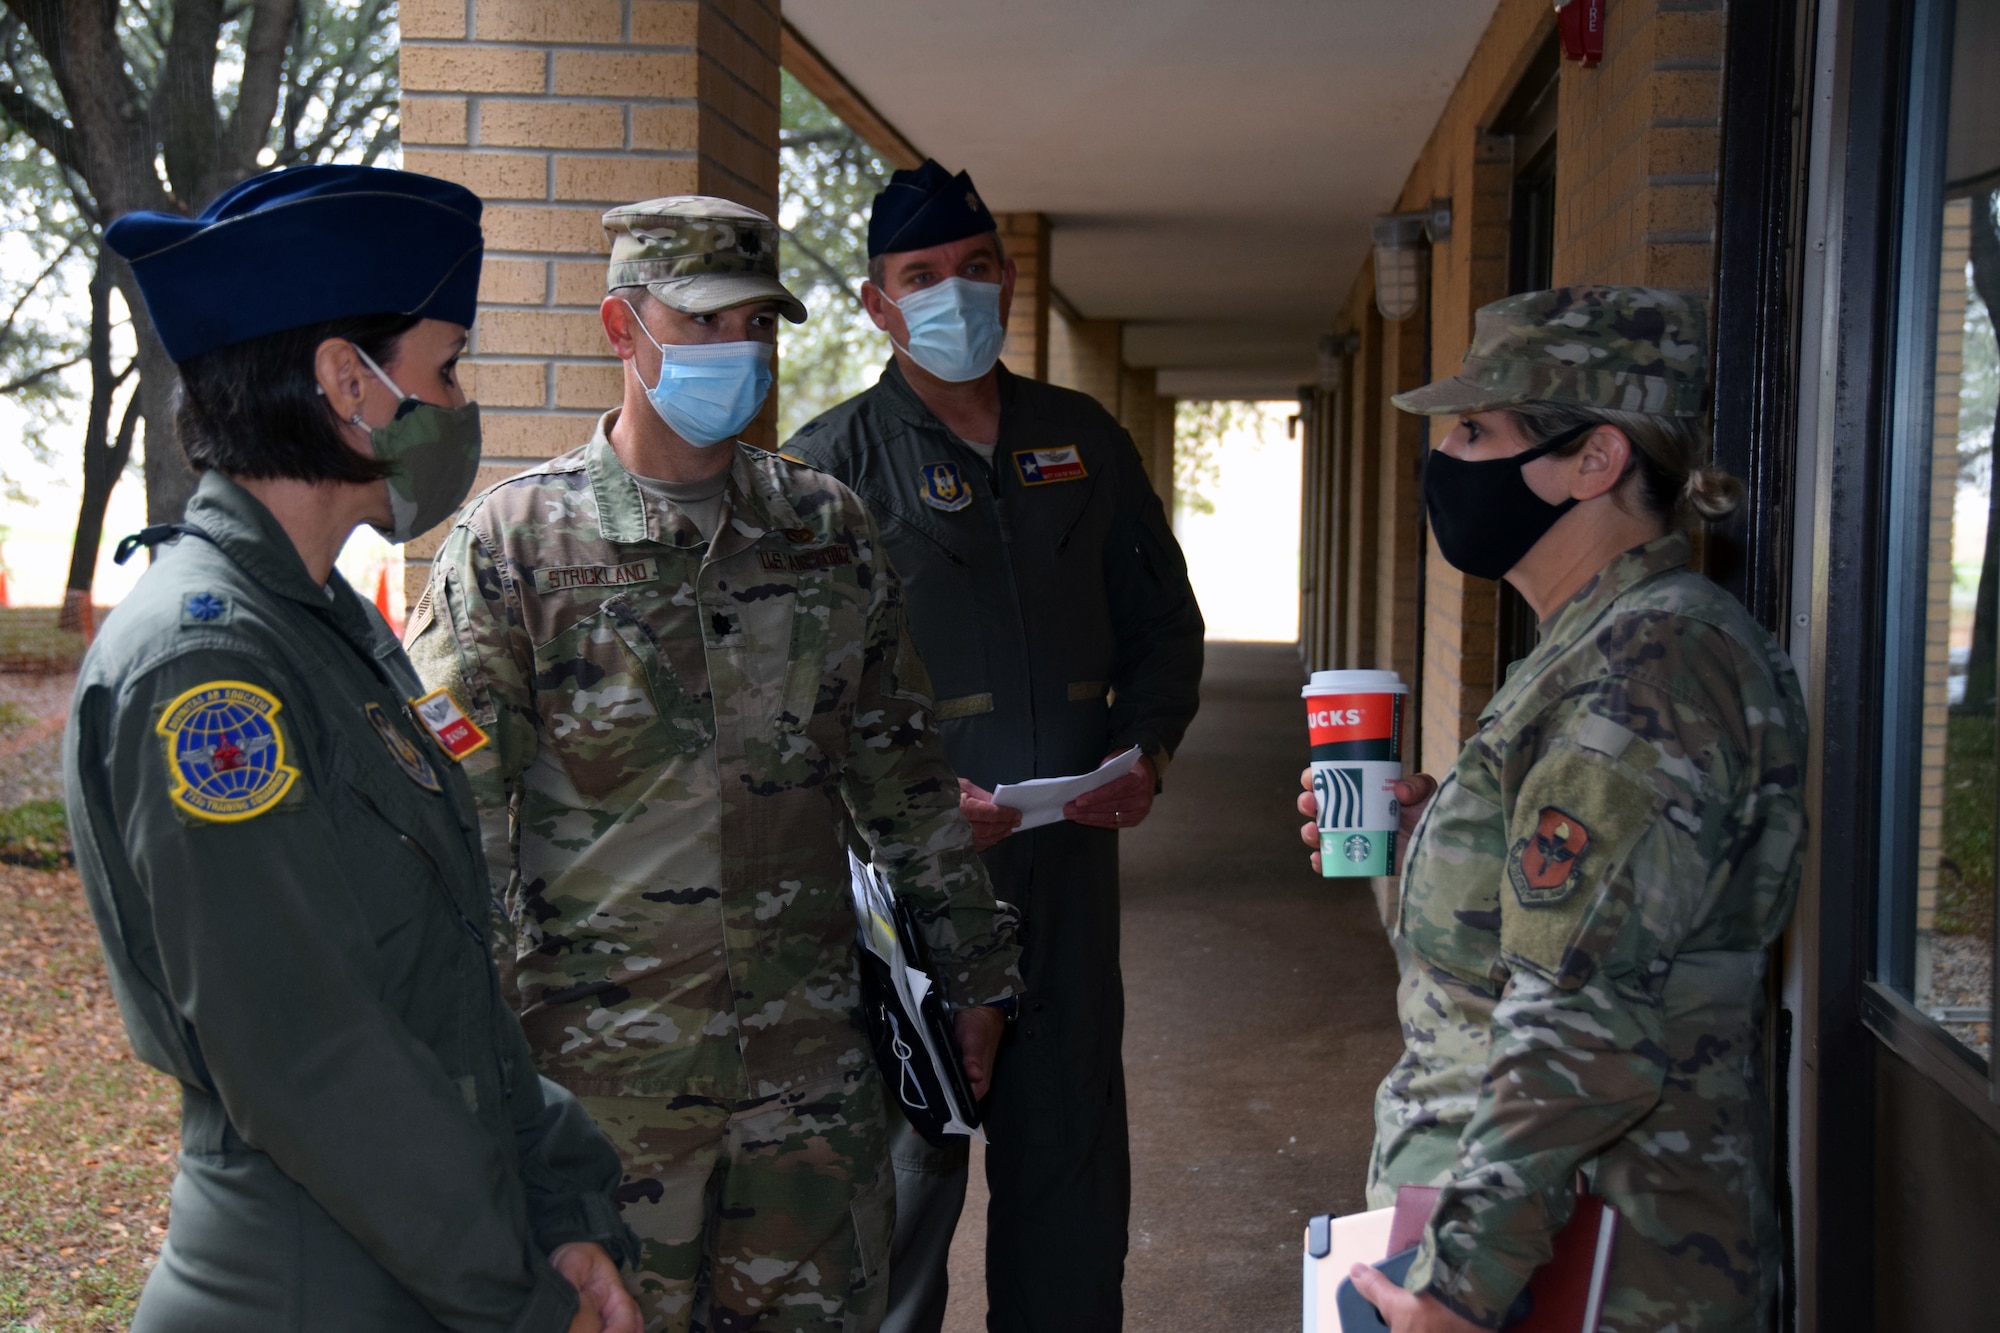 Lt. Col. Brandi B. King, 733rd Training Squadron director of operations, briefs Lt. Col. Brian K. Strickland, 502nd Civil Engineer Group deputy director, Lt. Col. Andrew C. Van De Walle, 433rd Operations Group deputy commander, and Brig. Gen. Caroline M. Miller, 502nd Air Base Wing commander, about the 433rd Airlift Wing’s C-5M Super Galaxy formal training unit’s student lodging facility requirements Nov. 24, 2020 at Joint Base San Antonio-Lackland, Texas. Miller, who assumed command of Joint Base San Antonio in June 2020, toured the facility to learn more about the FTU’s student support needs as a partner unit here. (U.S. Air Force photo by Tech. Sgt. Iram Carmona)